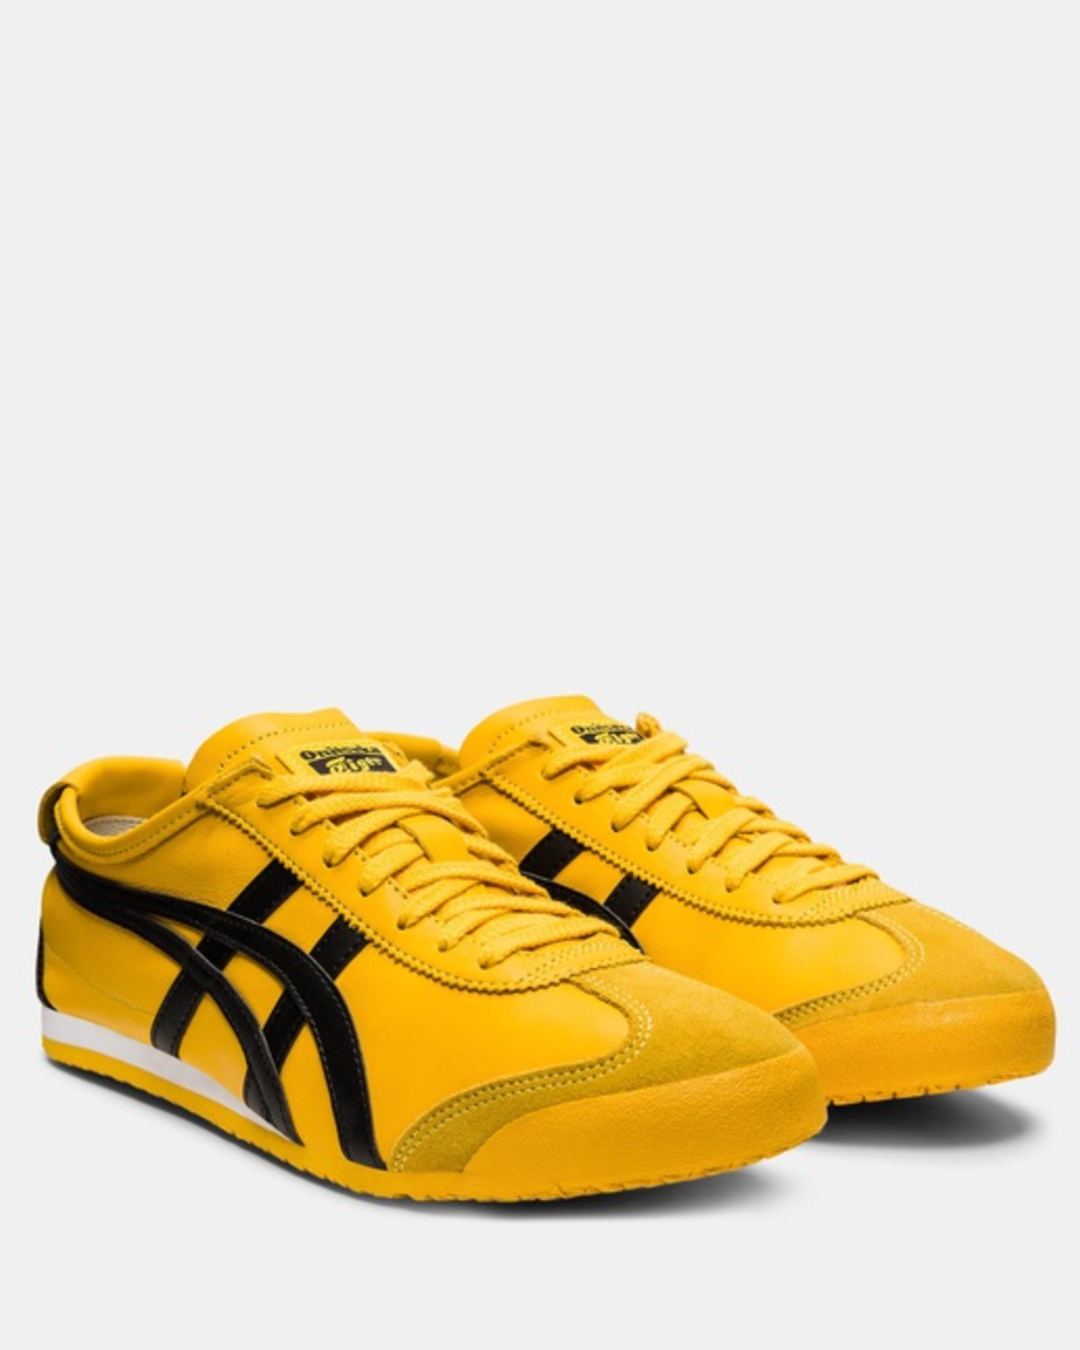 The Iconic Onitsuka Tiger Mexico 66 $180